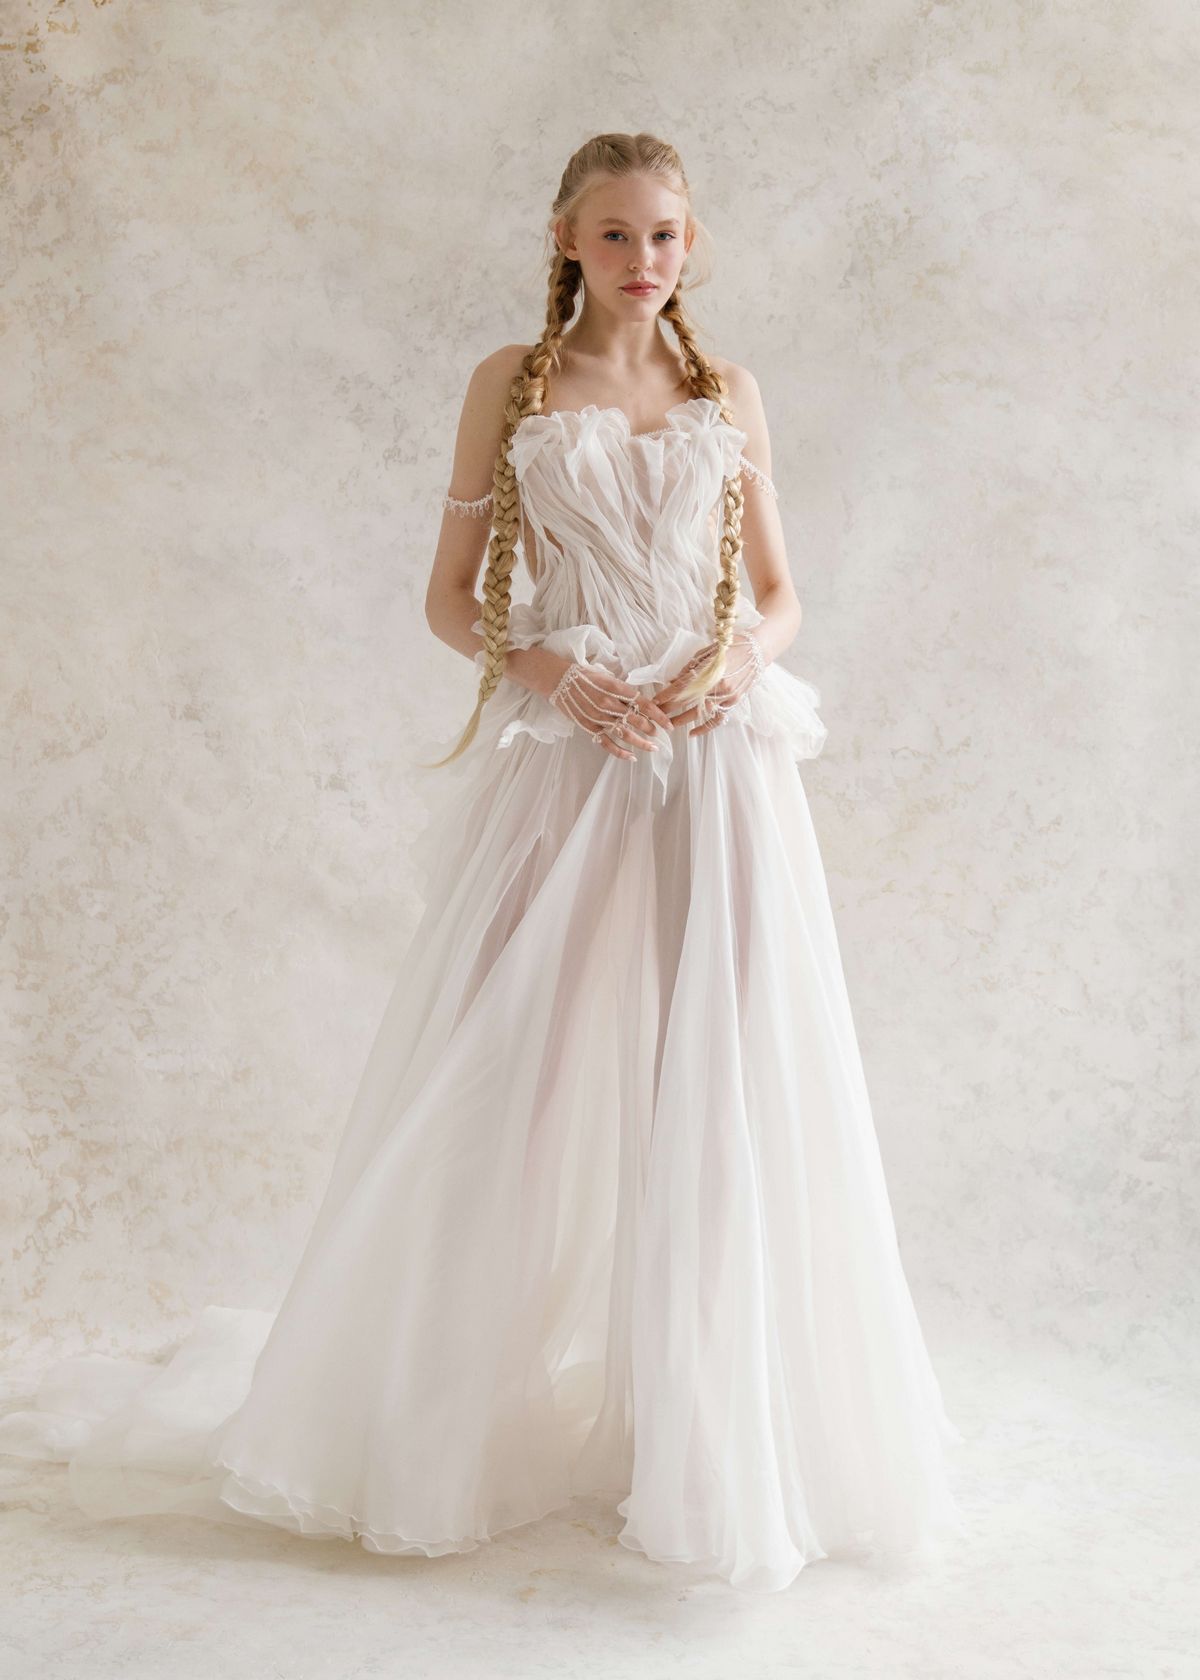 Rara Avis new trend wedding dress Minerale with detachable sleeves at Dell'Amore Bridal, NZ. 12